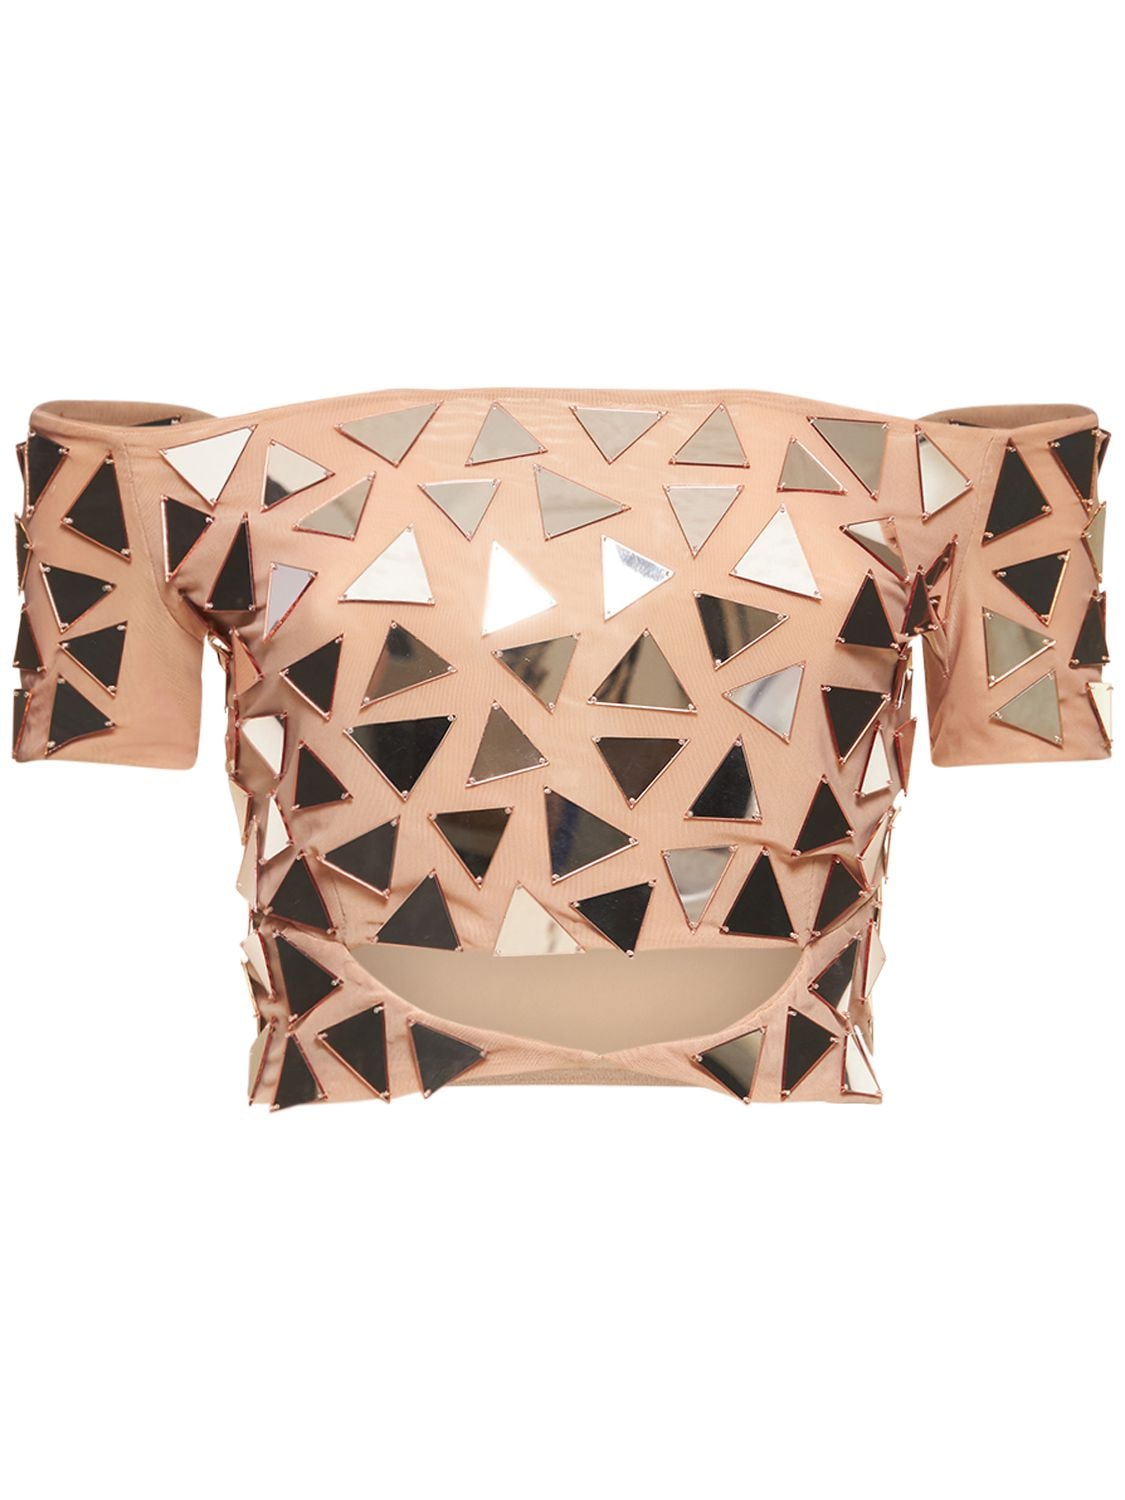 ALESSANDRO VIGILANTE EMBELLISHED CUT OUT JERSEY TOP